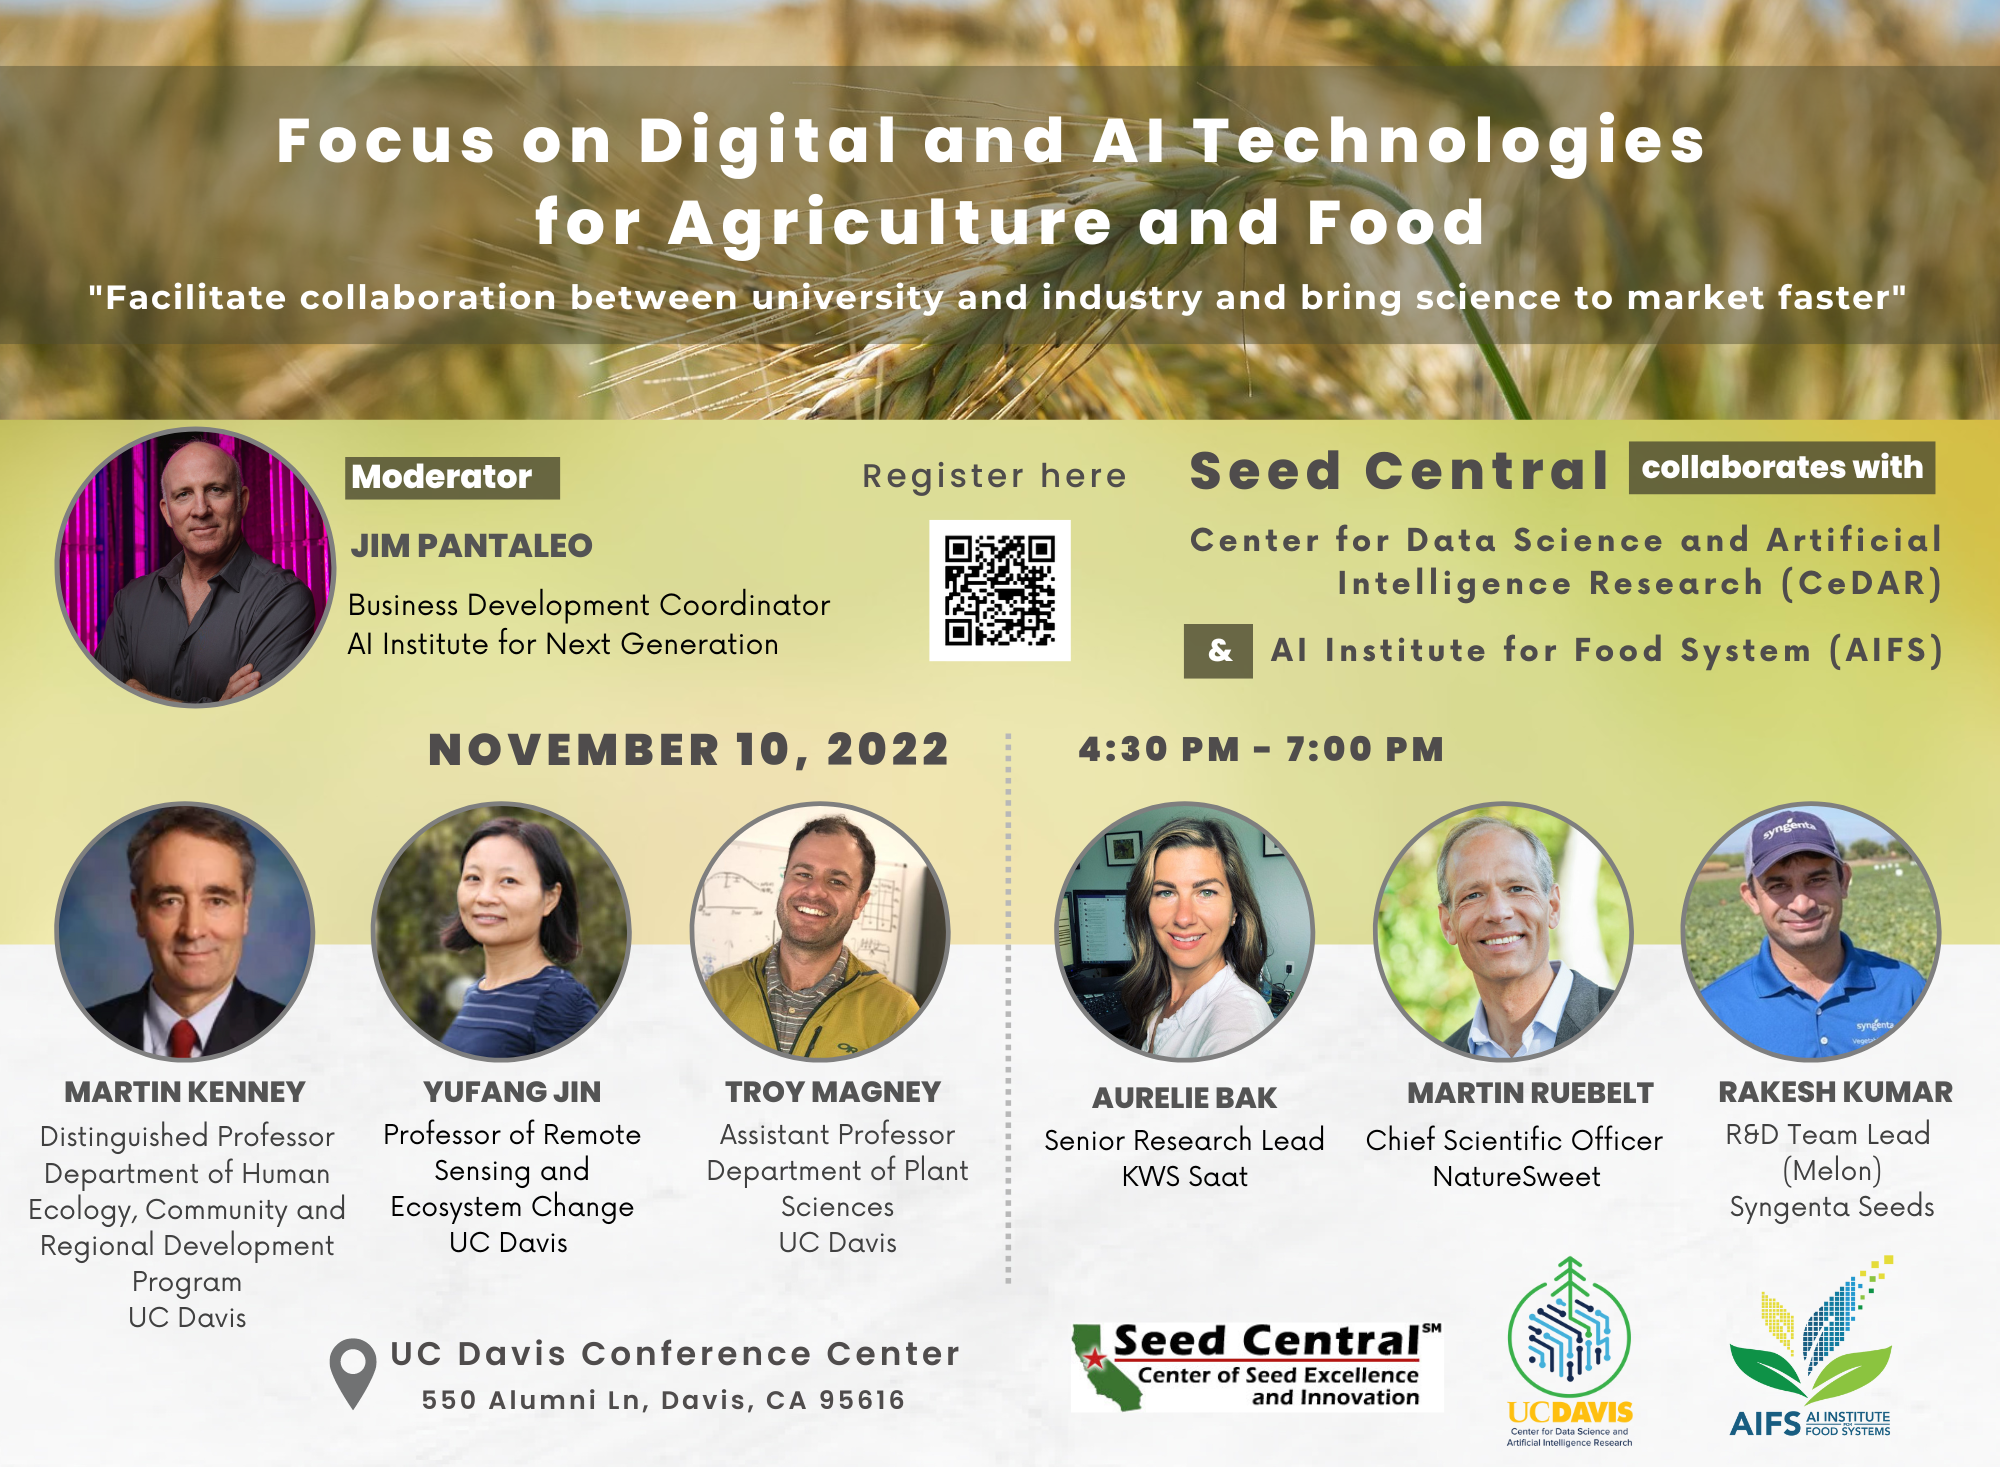 Focus on Digital and AI Technologies for Agriculture and Food